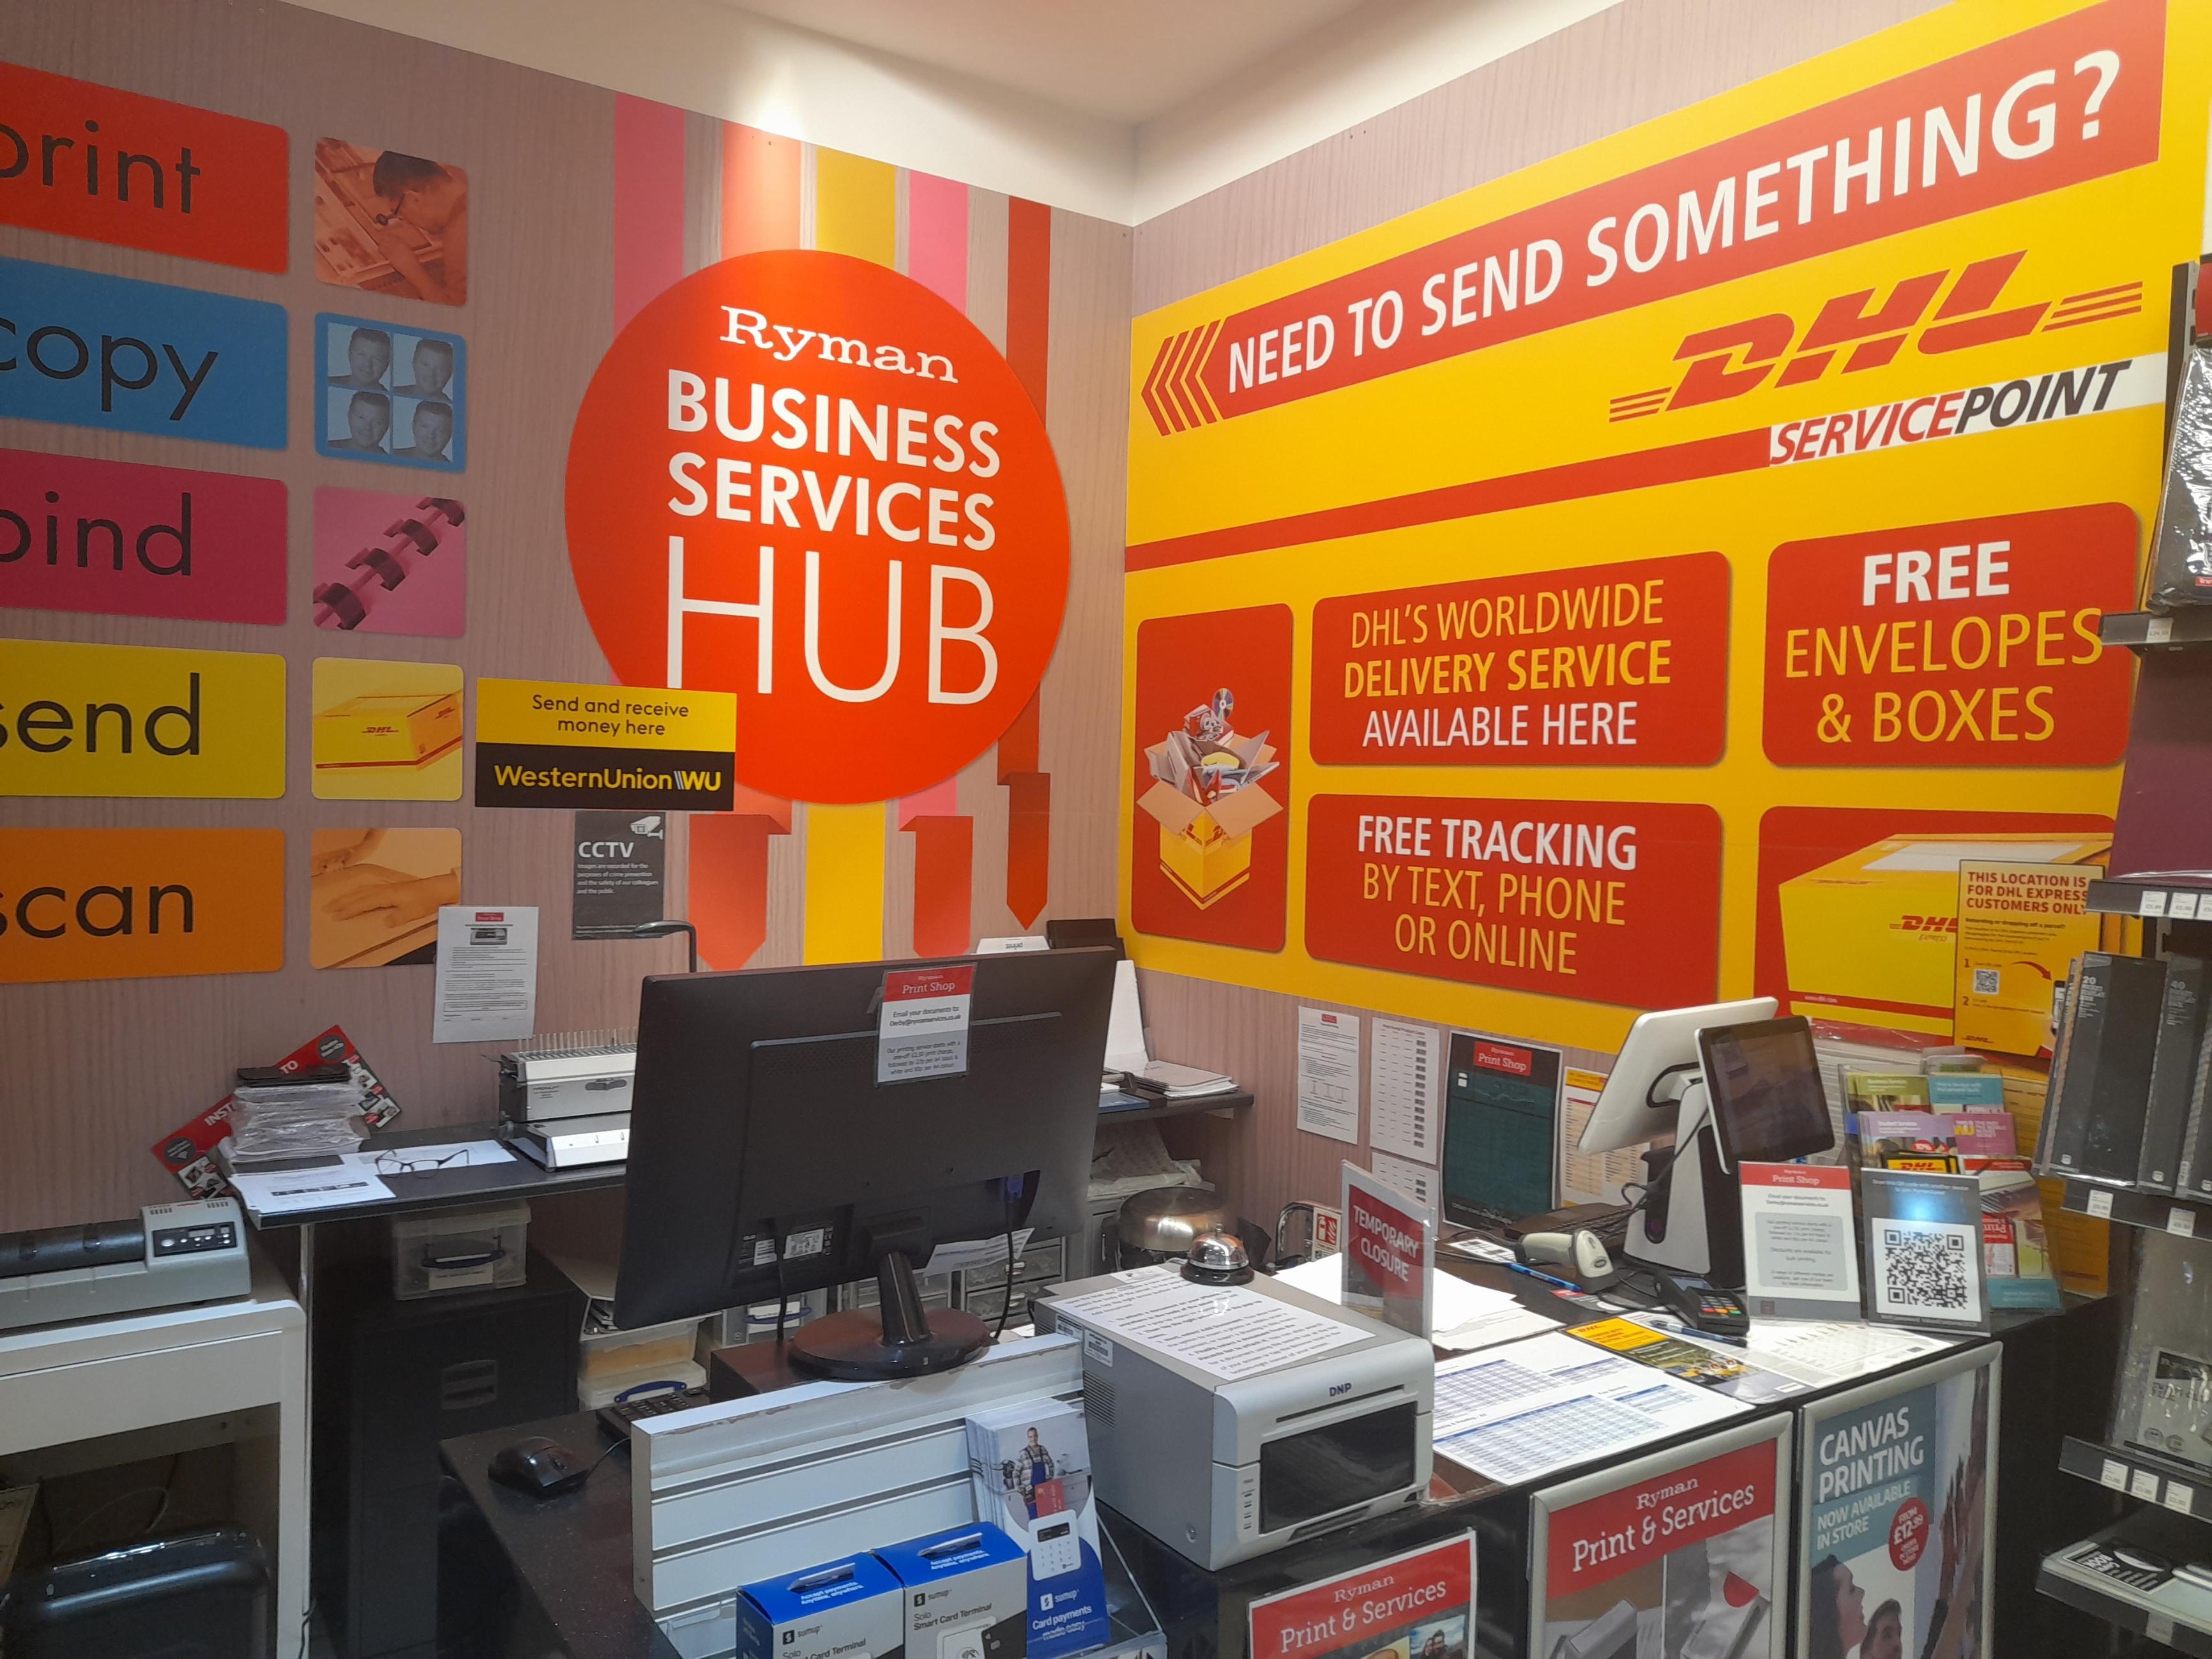 Images DHL Express Service Point (Ryman Derby)